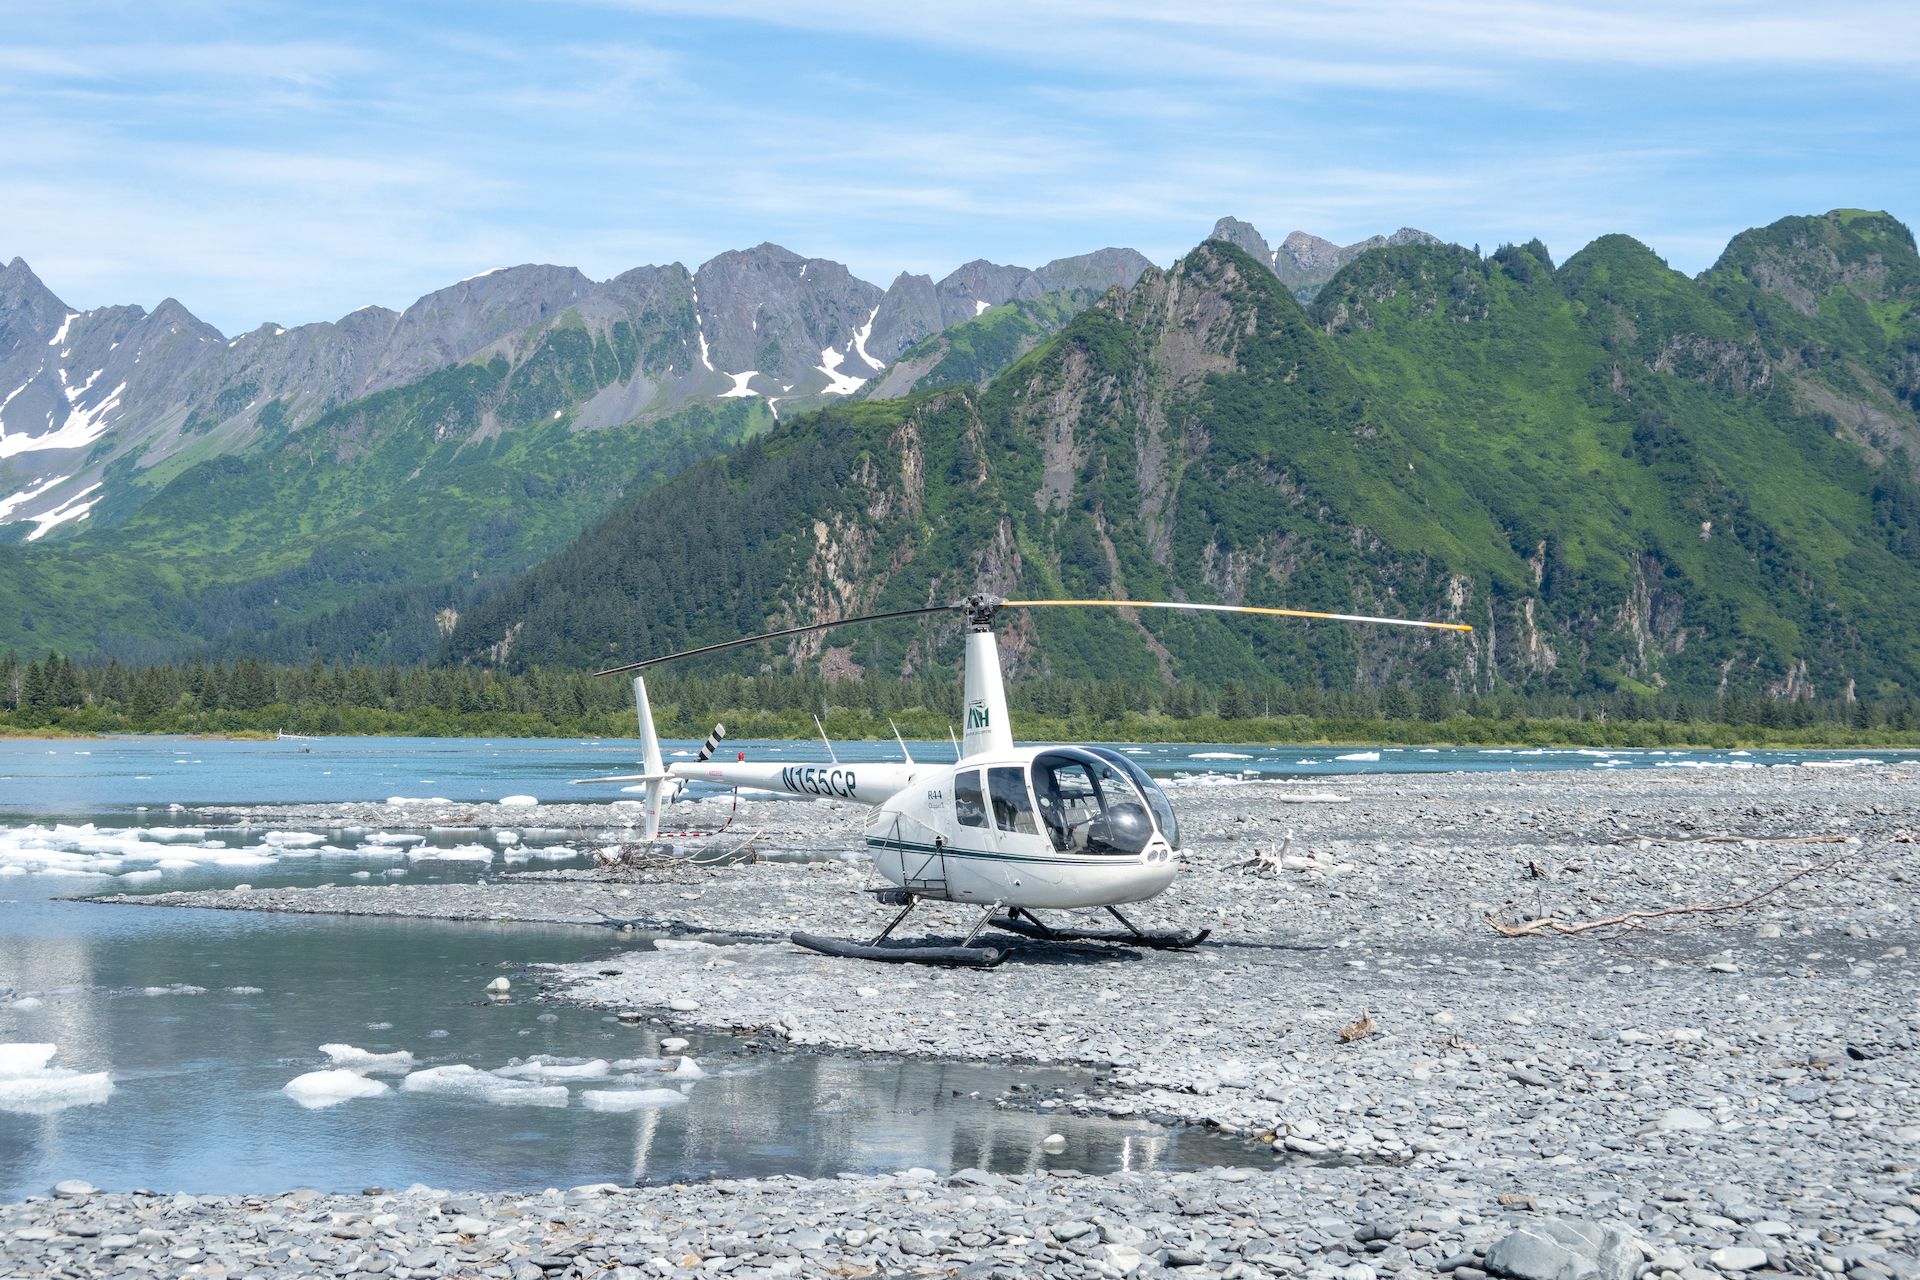 Our helicopter landed on the “beach,” a terminal moraine created by the retreating Bear Glacier that shelters the lagoon from the ocean.